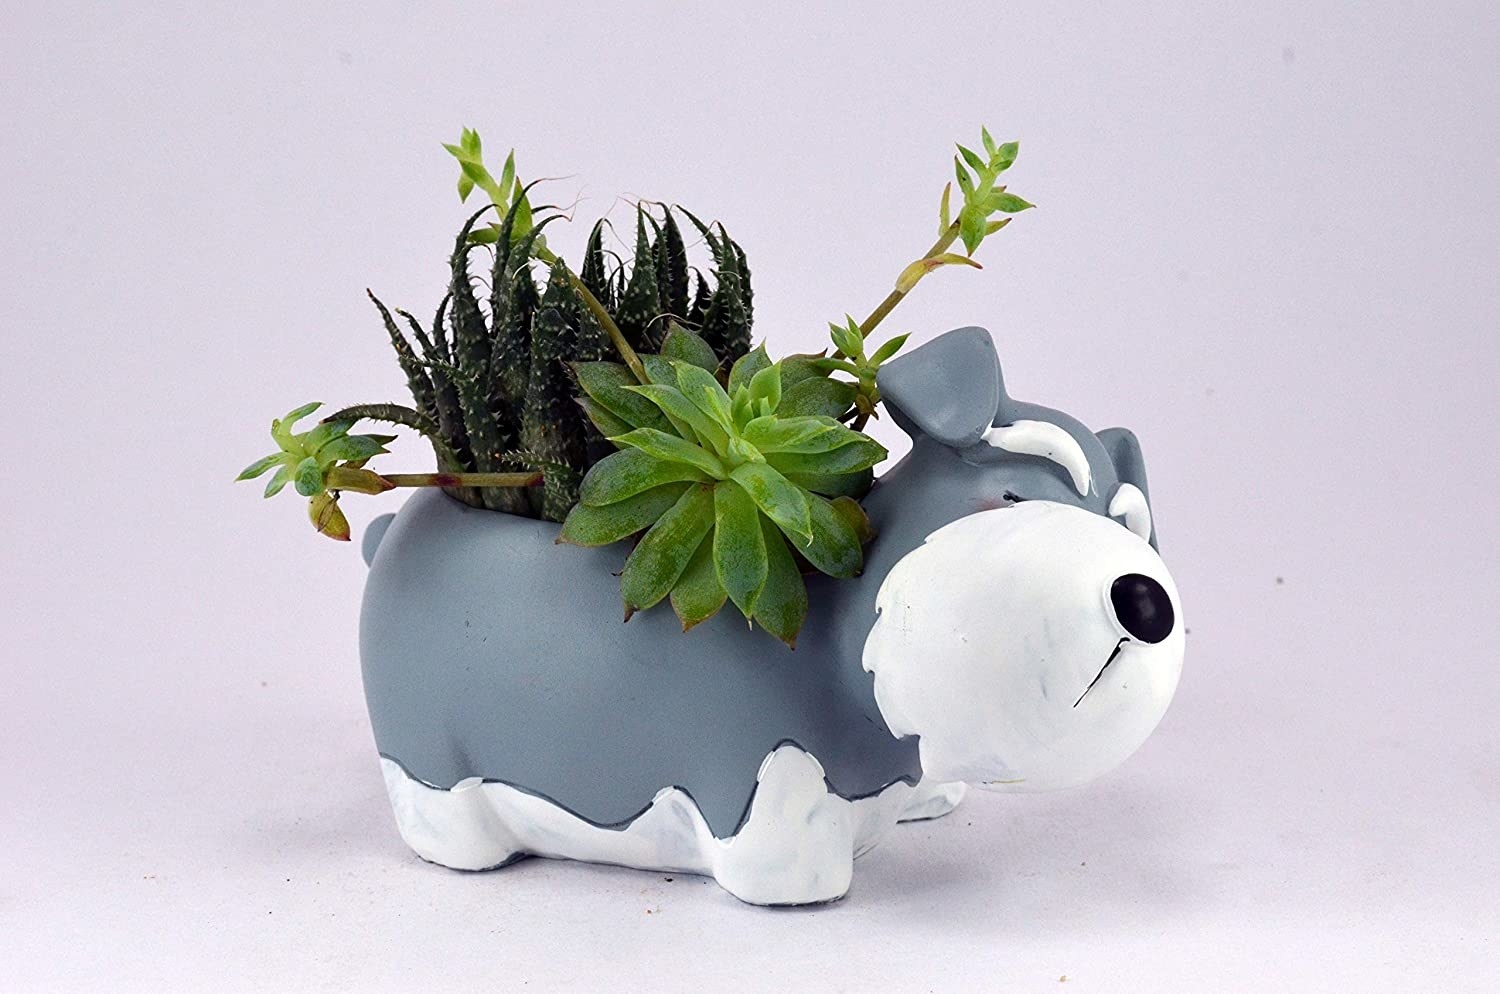 A grey dog planter with plants